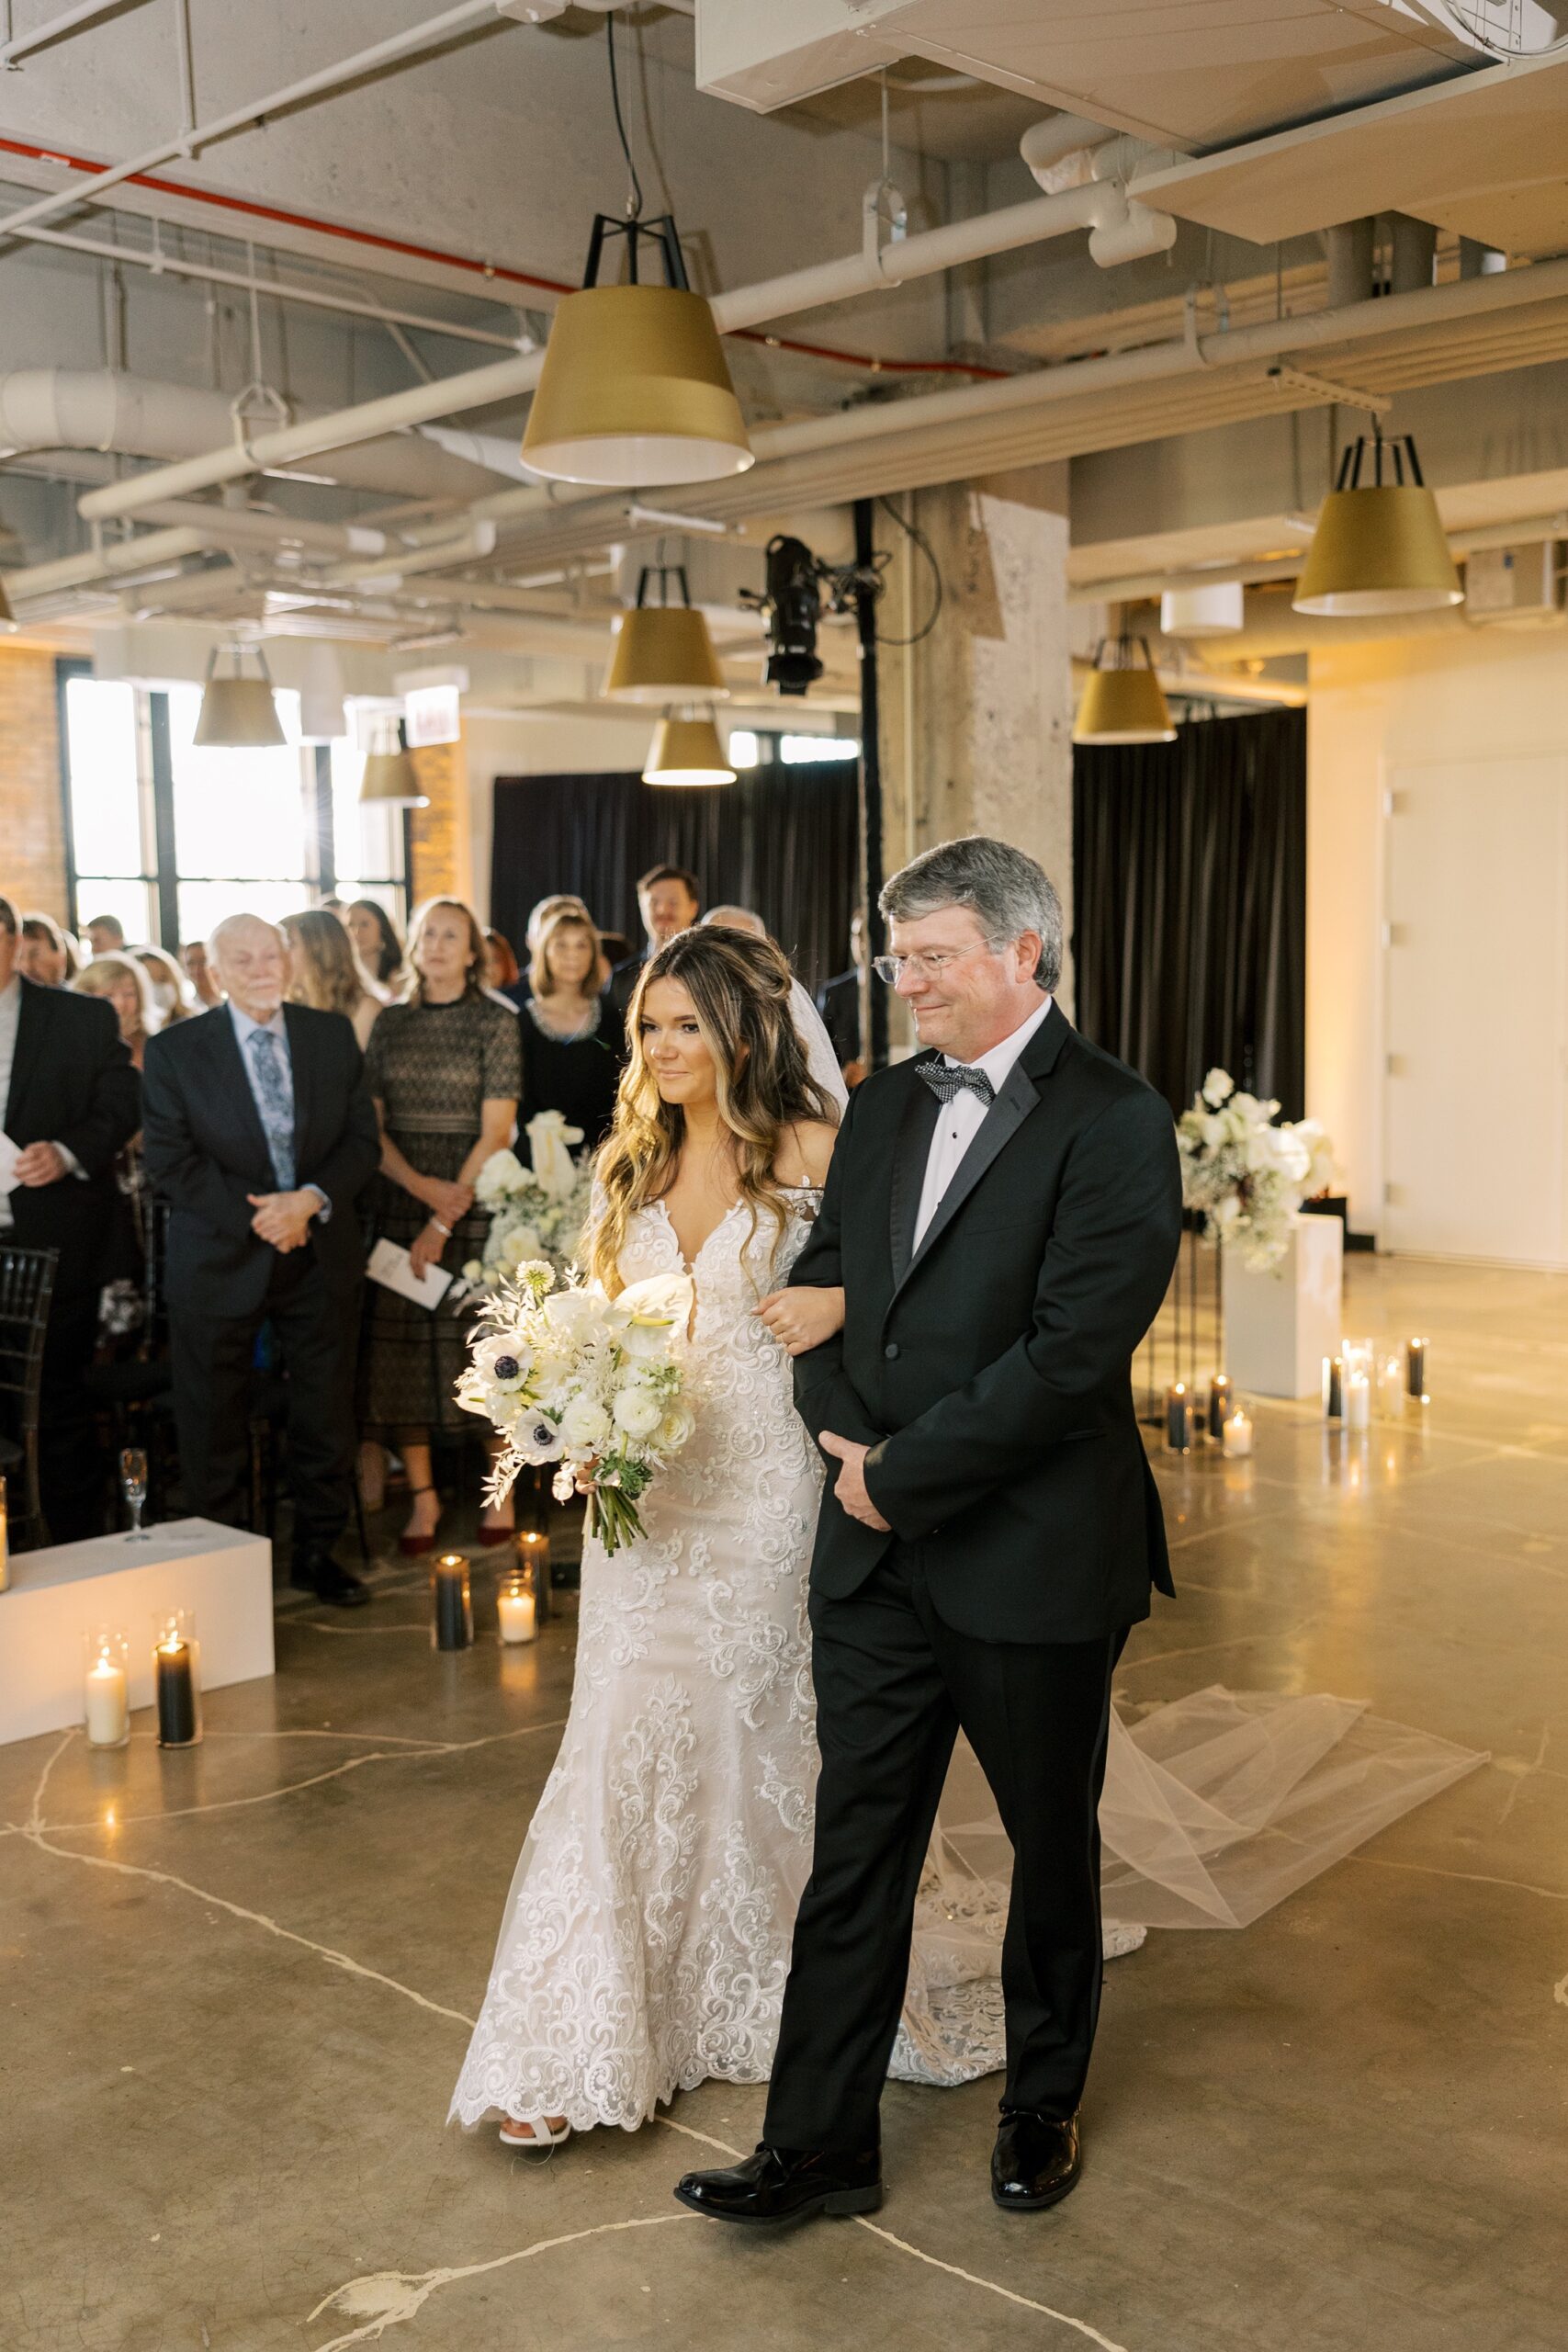 Father of the bride walks bride down aisle at Old Post Office wedding